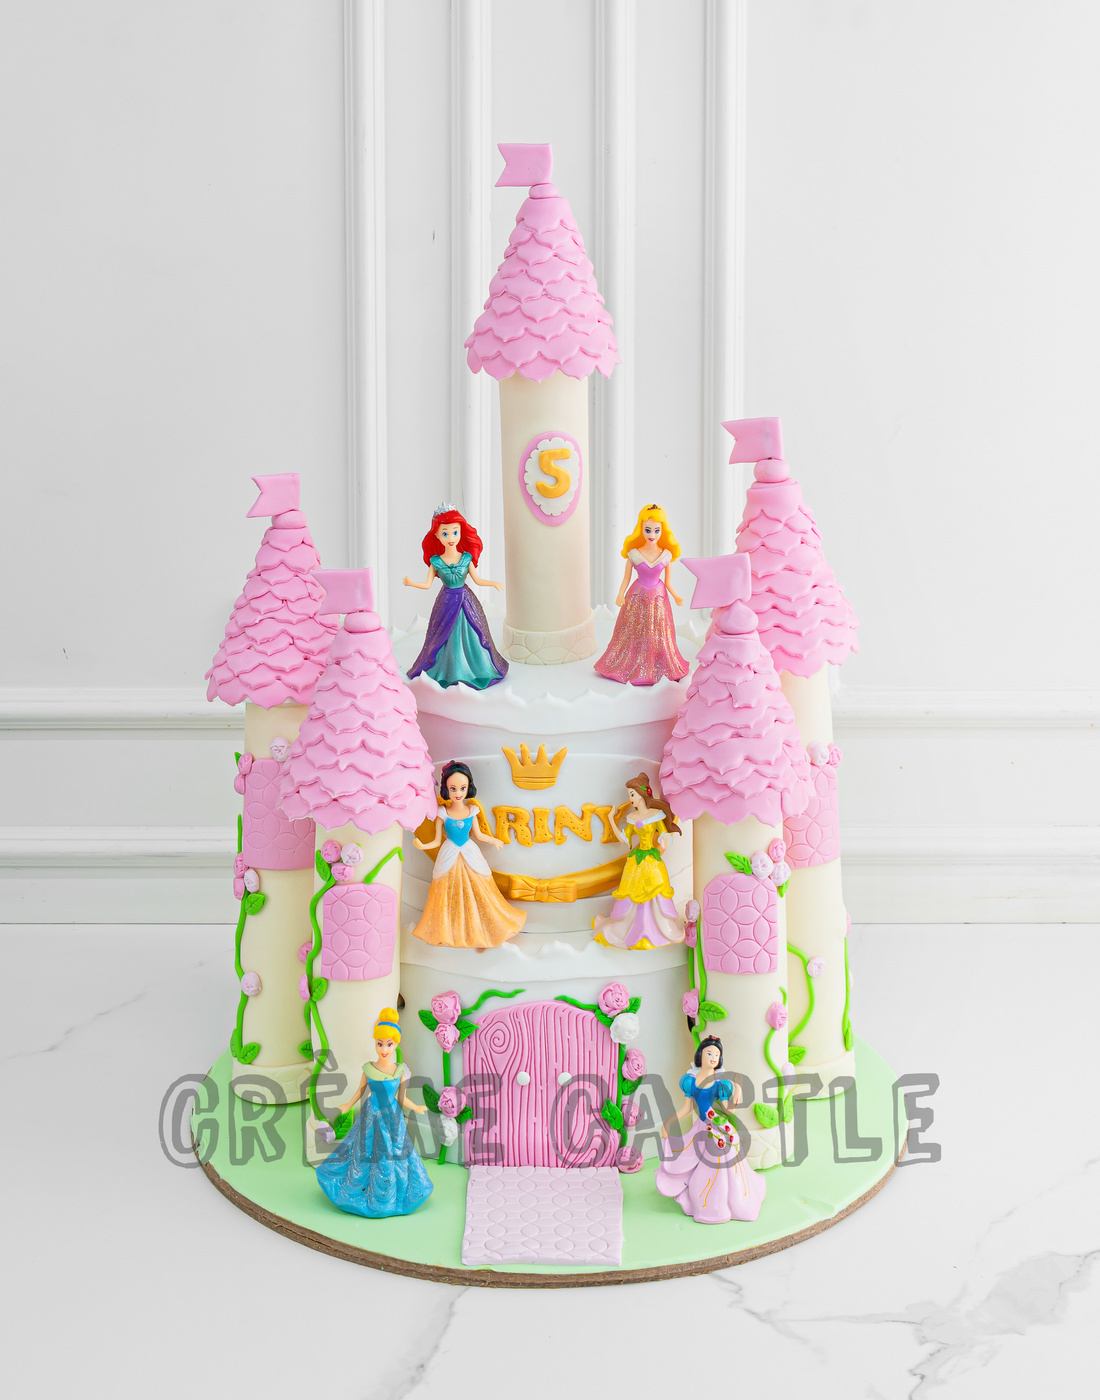 Happy ever after | Castle cake, Disney cakes, Themed cakes